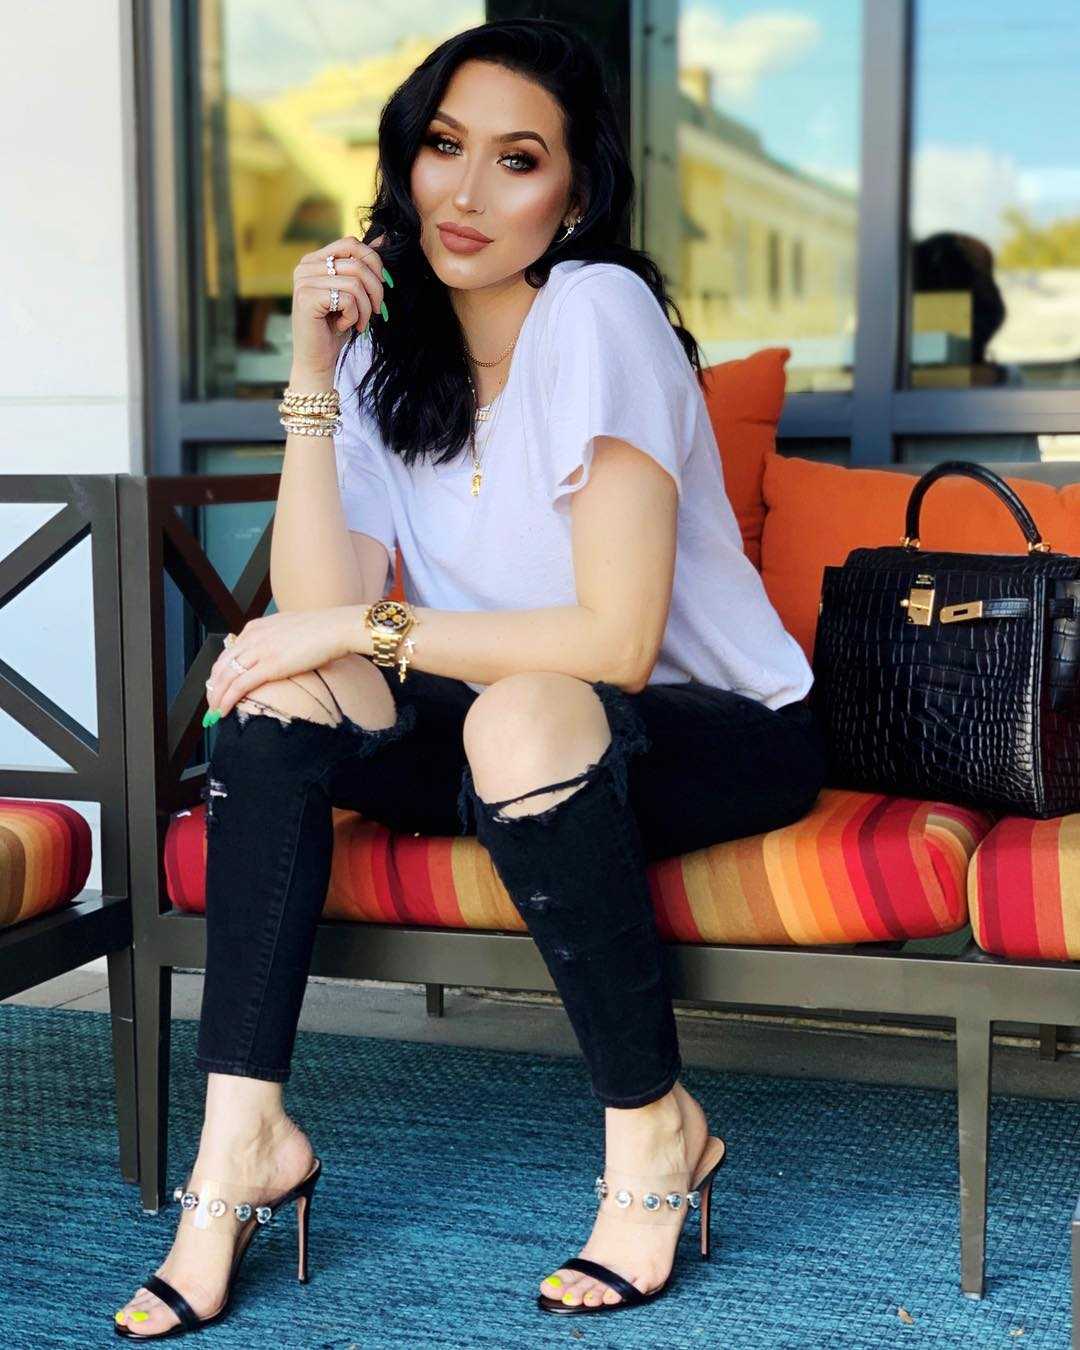 51 Sexy Jaclyn Hill Boobs Pictures Will Induce Passionate Feelings for Her 22